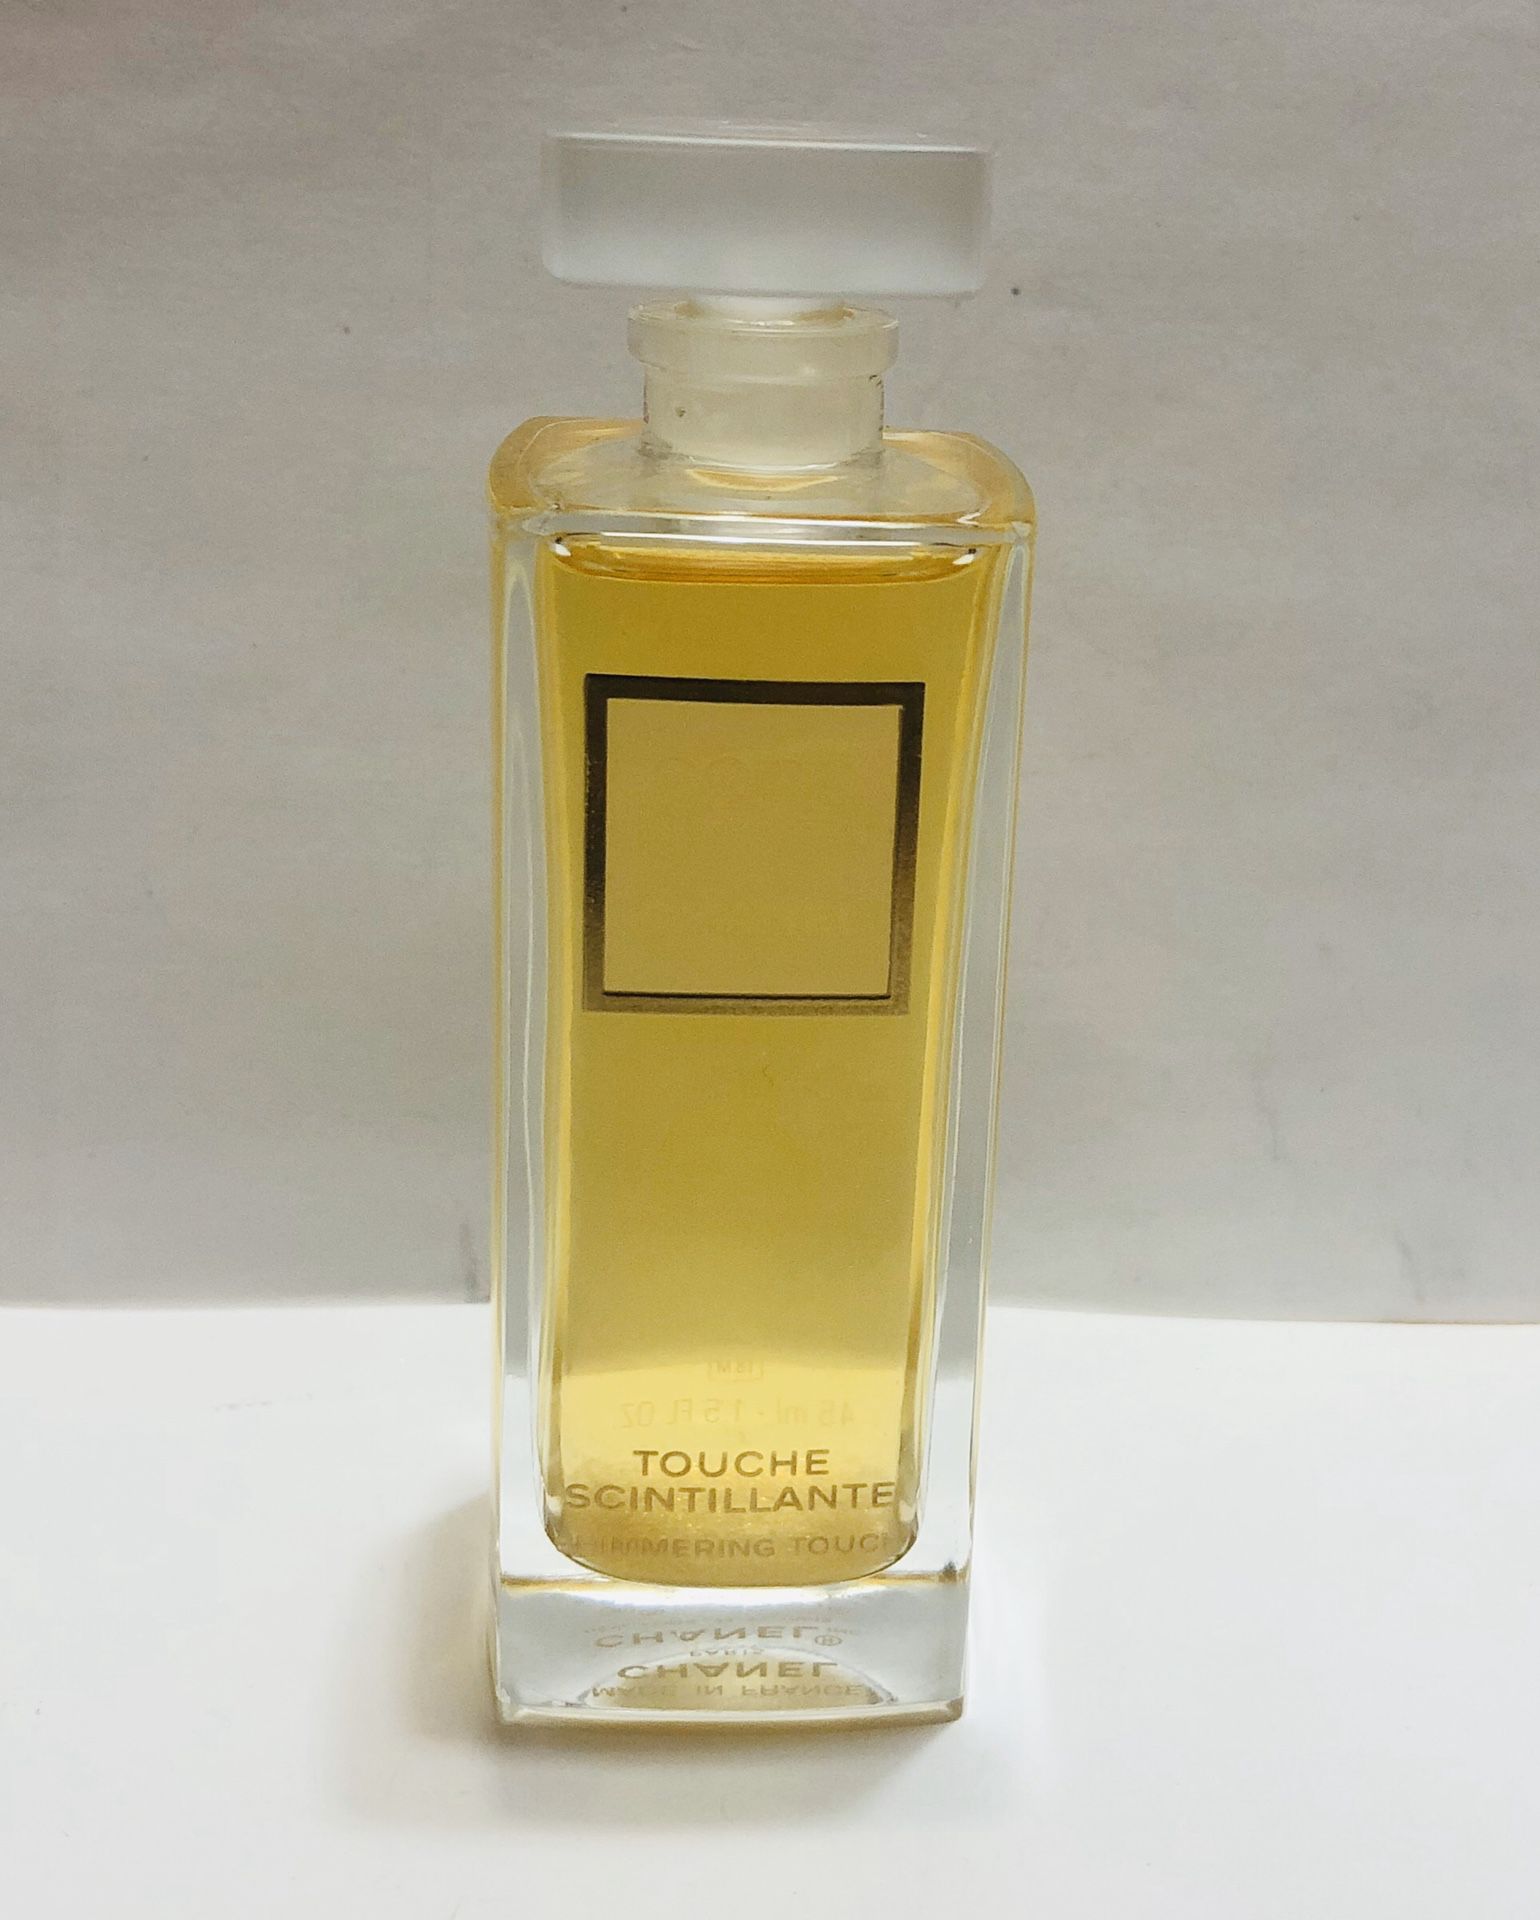 CHANEL COCO MADEMOISELLE SHIMMERING TOUCH PERFUME 1.7 OZ